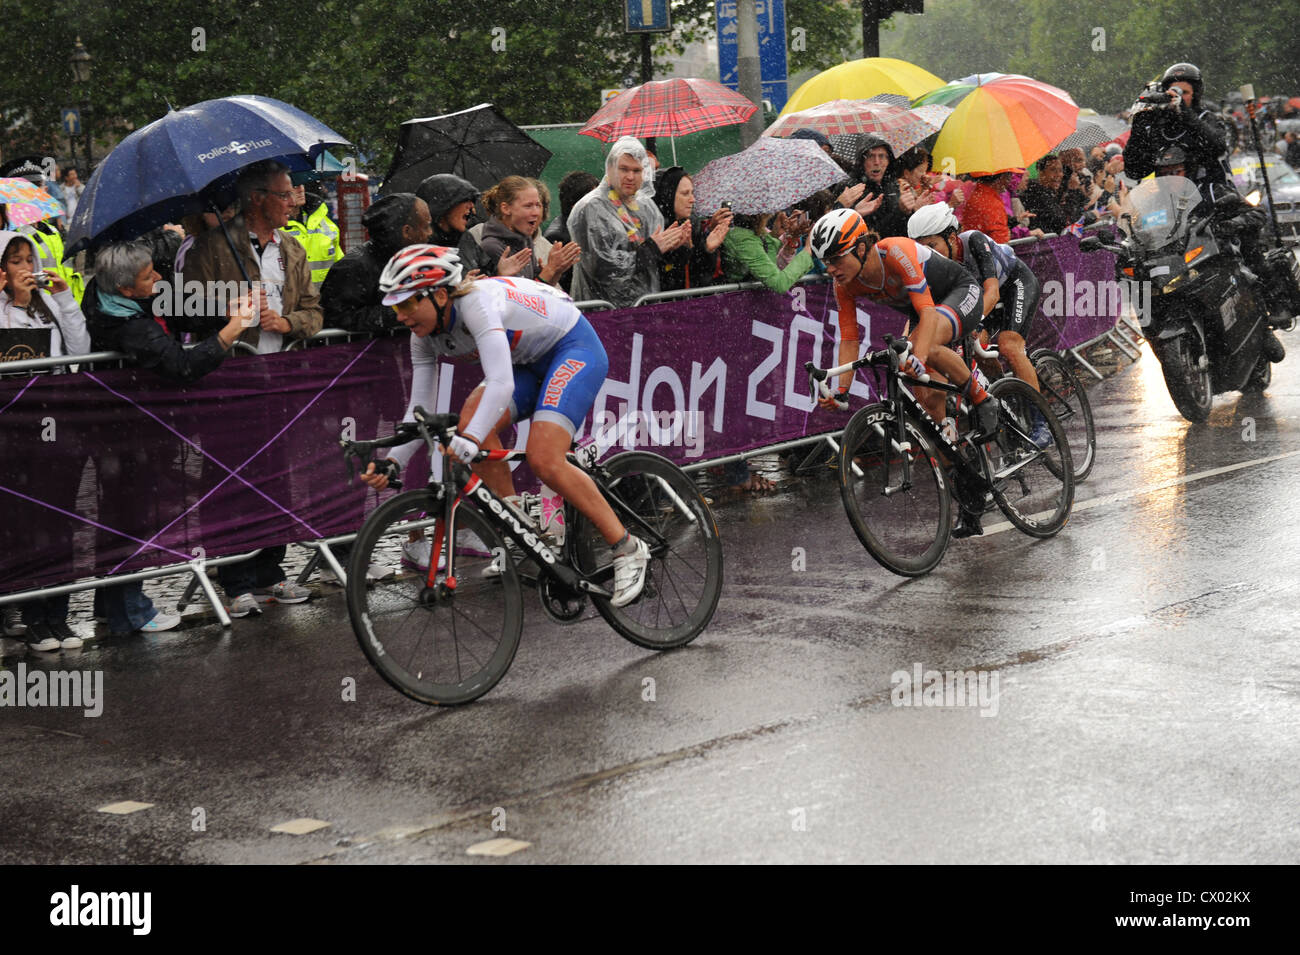 Olga Zabelinskaya, Marianne Vos and Lizzie Armistead battle for gold in the women's cycling road race,  London 2012 Olympics Stock Photo